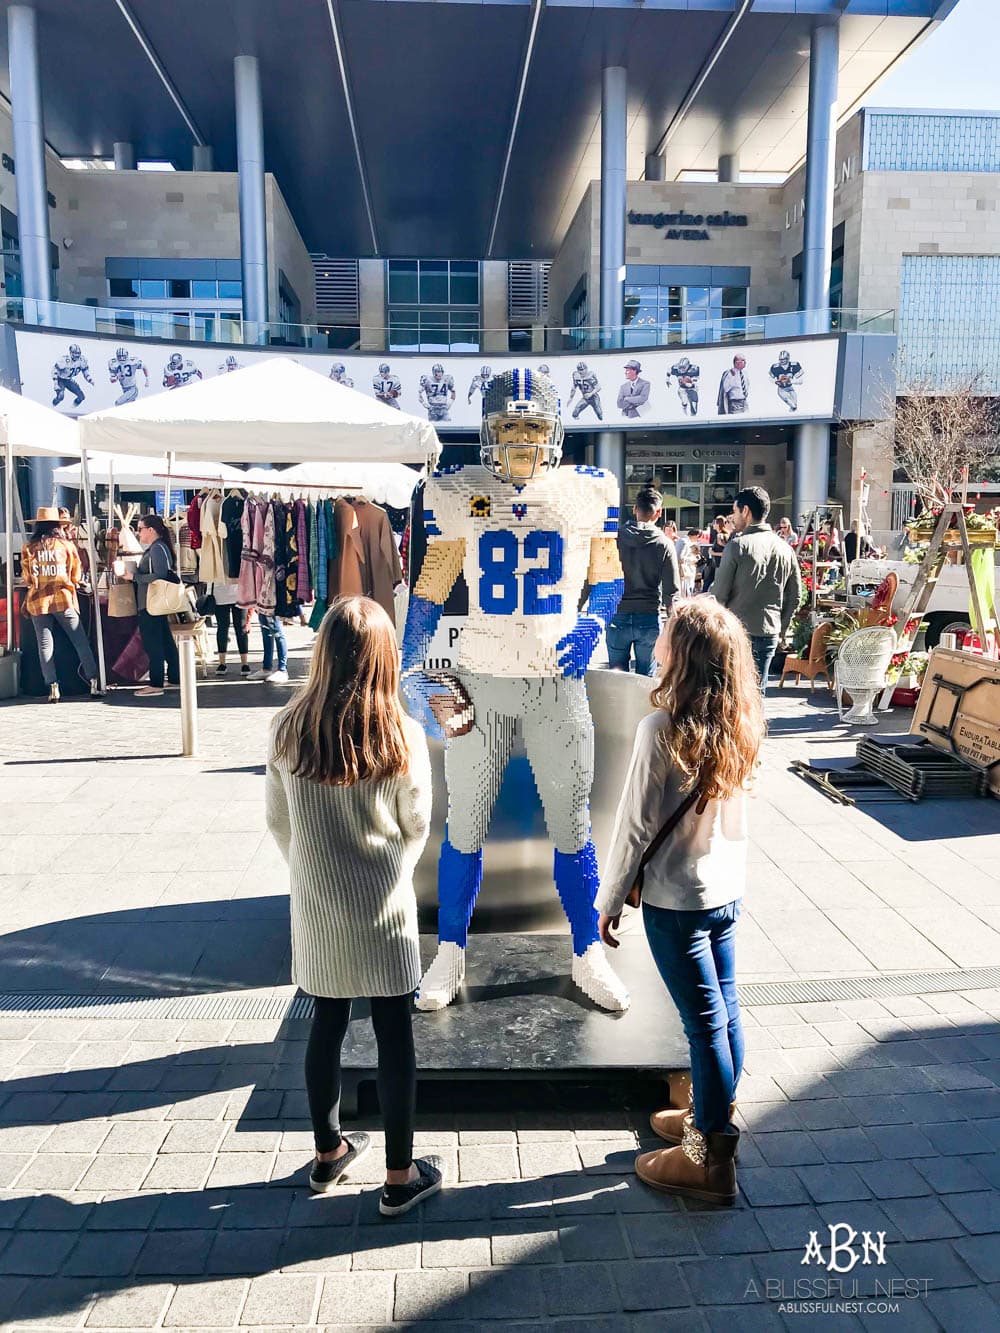 The Star District as it's the perfect place to shop, dine, and bring the family to experience the Dallas Cowboys themed campus. Offering more than thirty restaurants, shopping and specialty services, The Star District is a place for the whole family to enjoy. #ad #TheStar #MarketAtTheStar